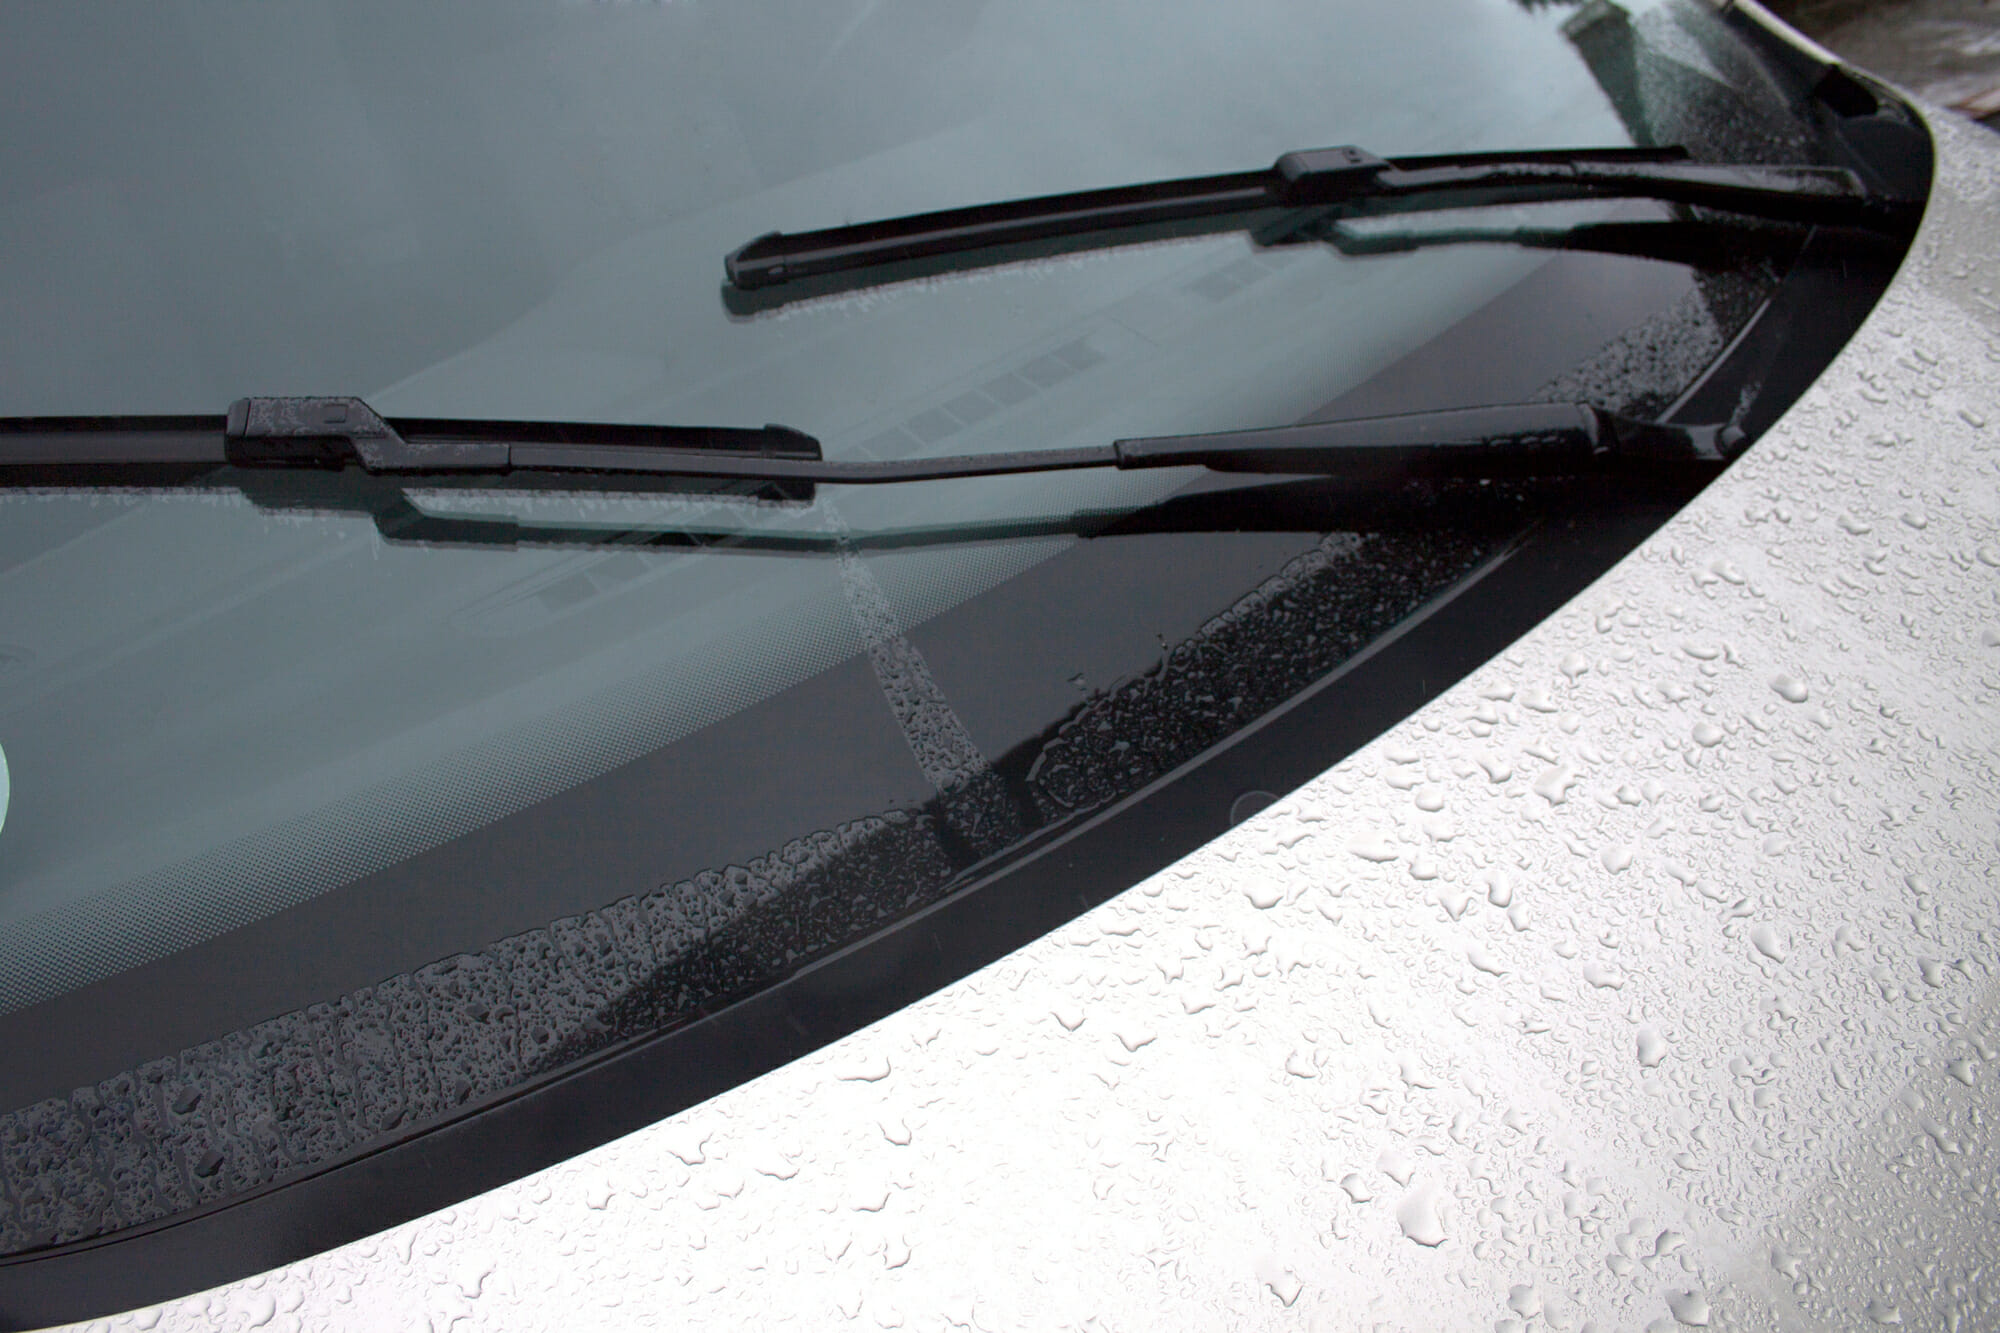 How to Make Windshield Wiper Blades Last in Your Car